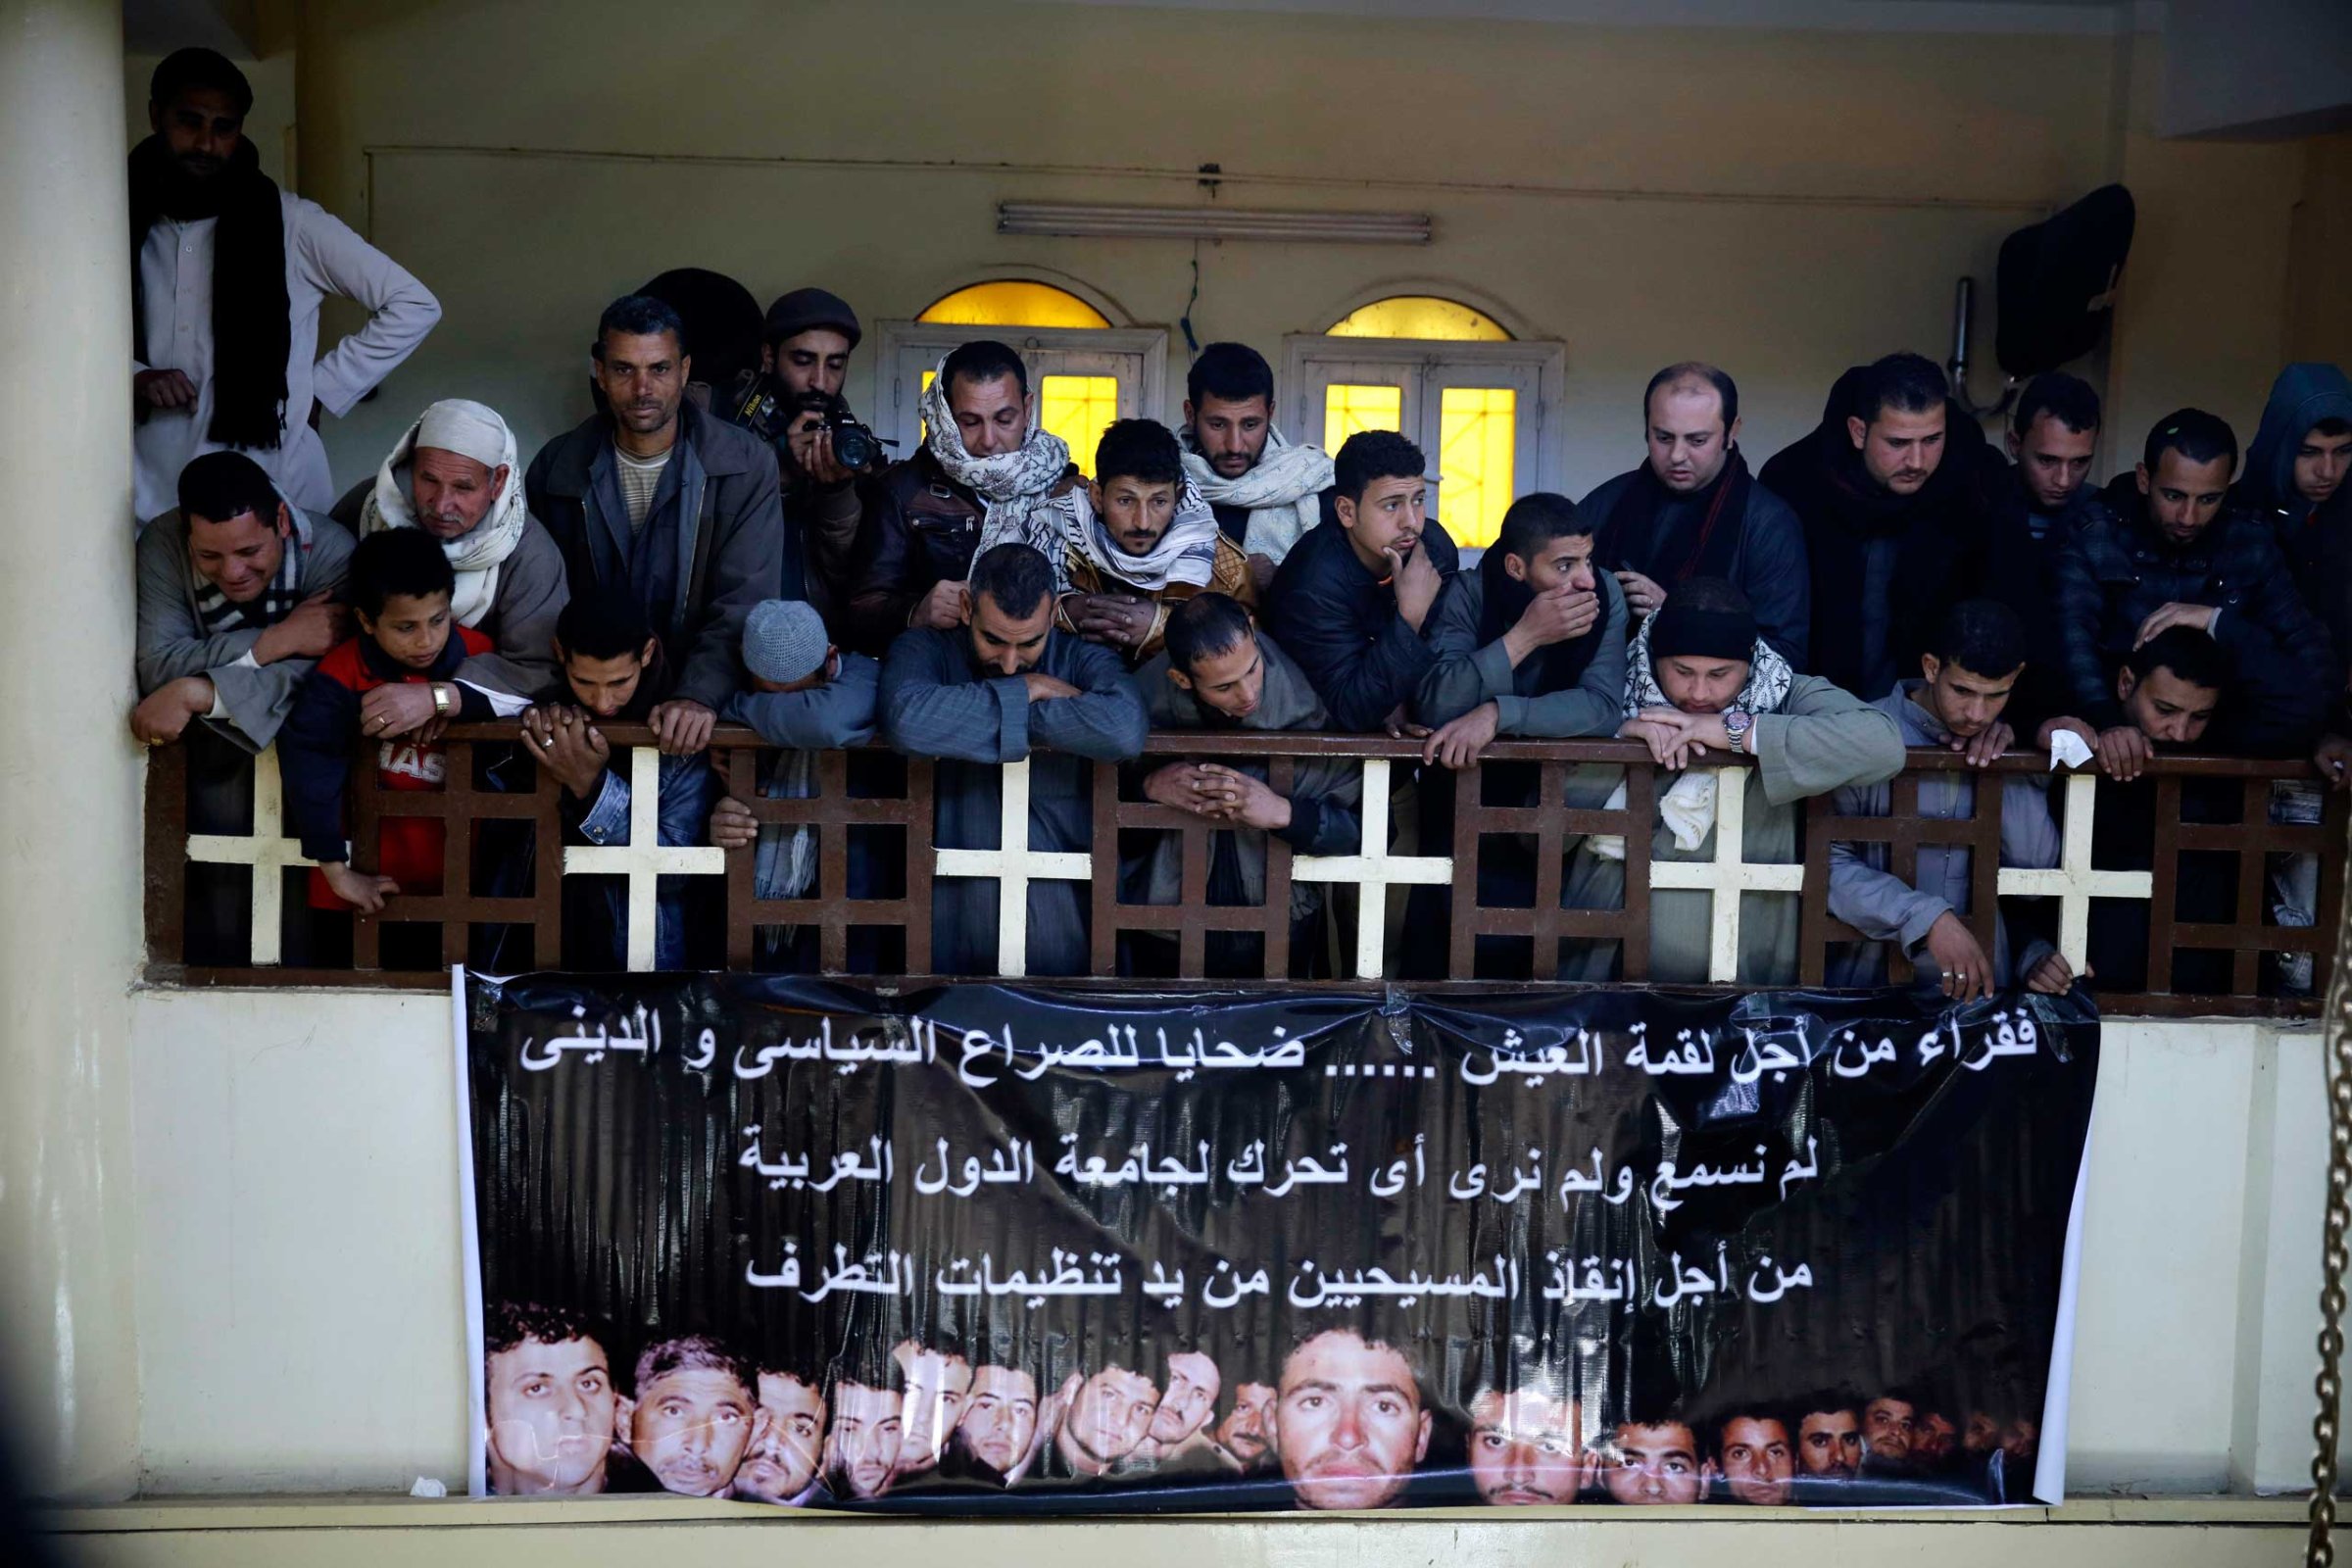 Men mourn over Egyptian Coptic Christians who were captured in Libya and killed by militants affiliated with ISIS, inside the Virgin Mary Church in the village of Al-Aour, Egypt, Feb. 16, 2015.